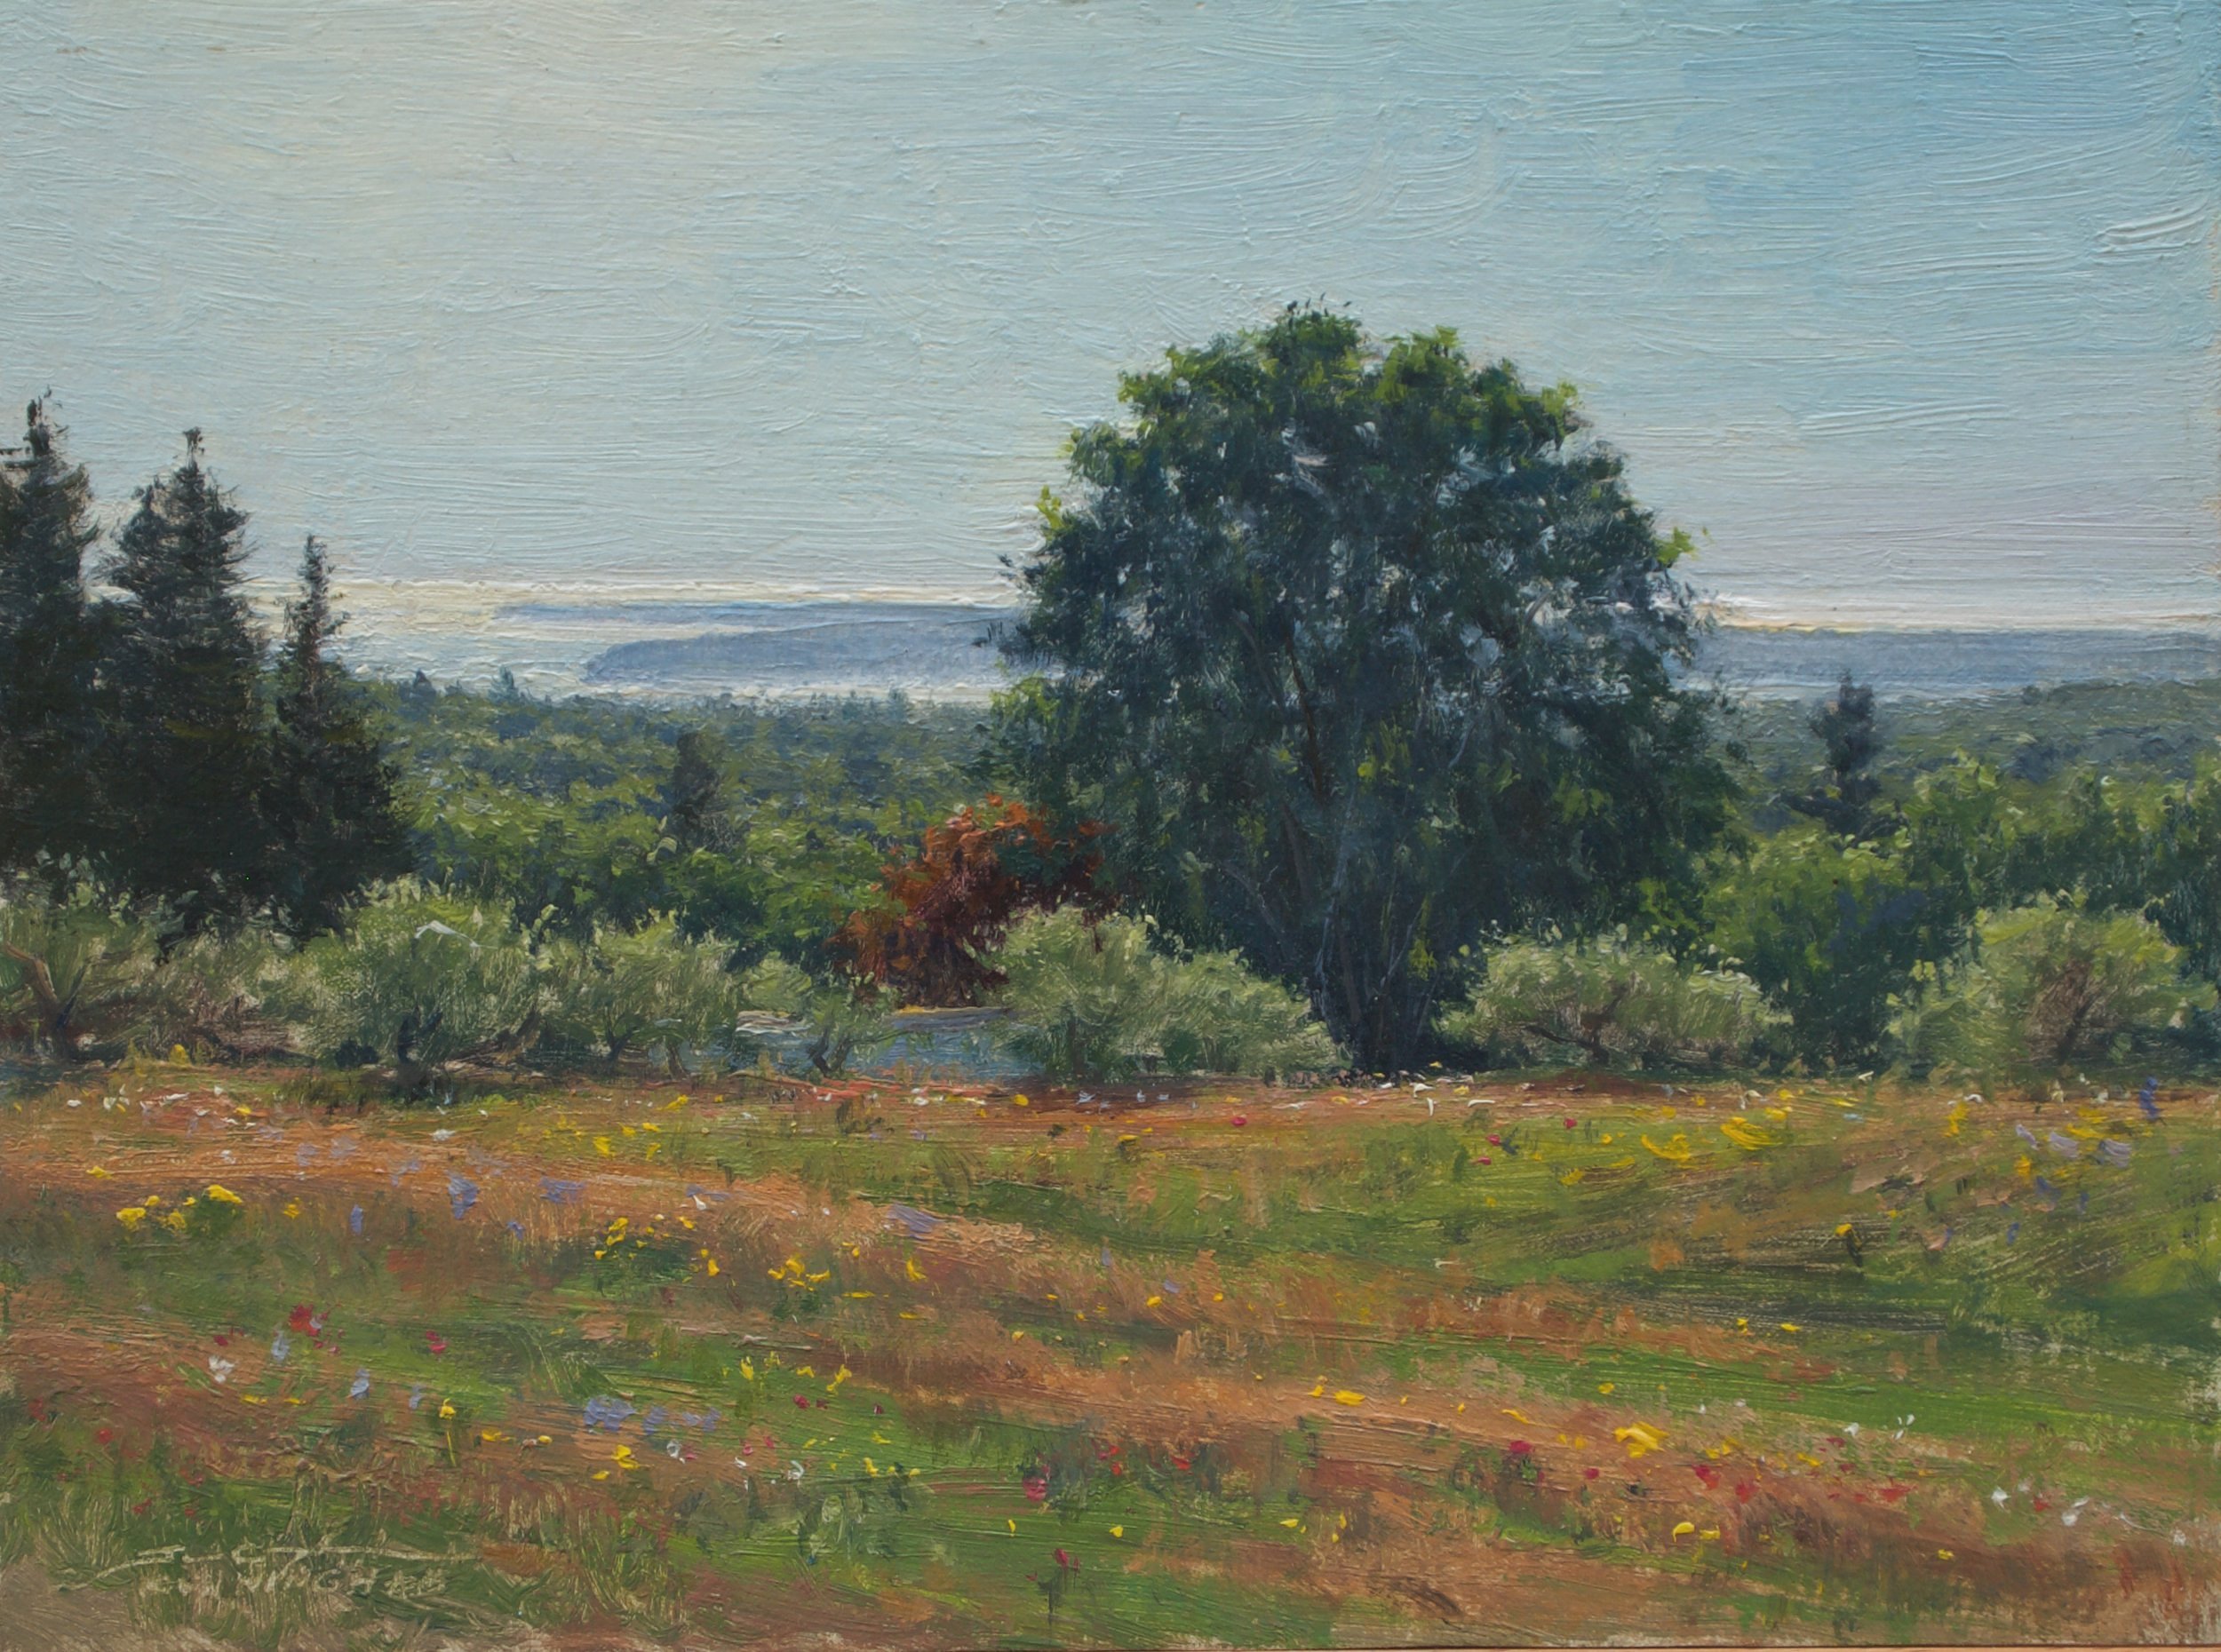 Islands Above the Orchard